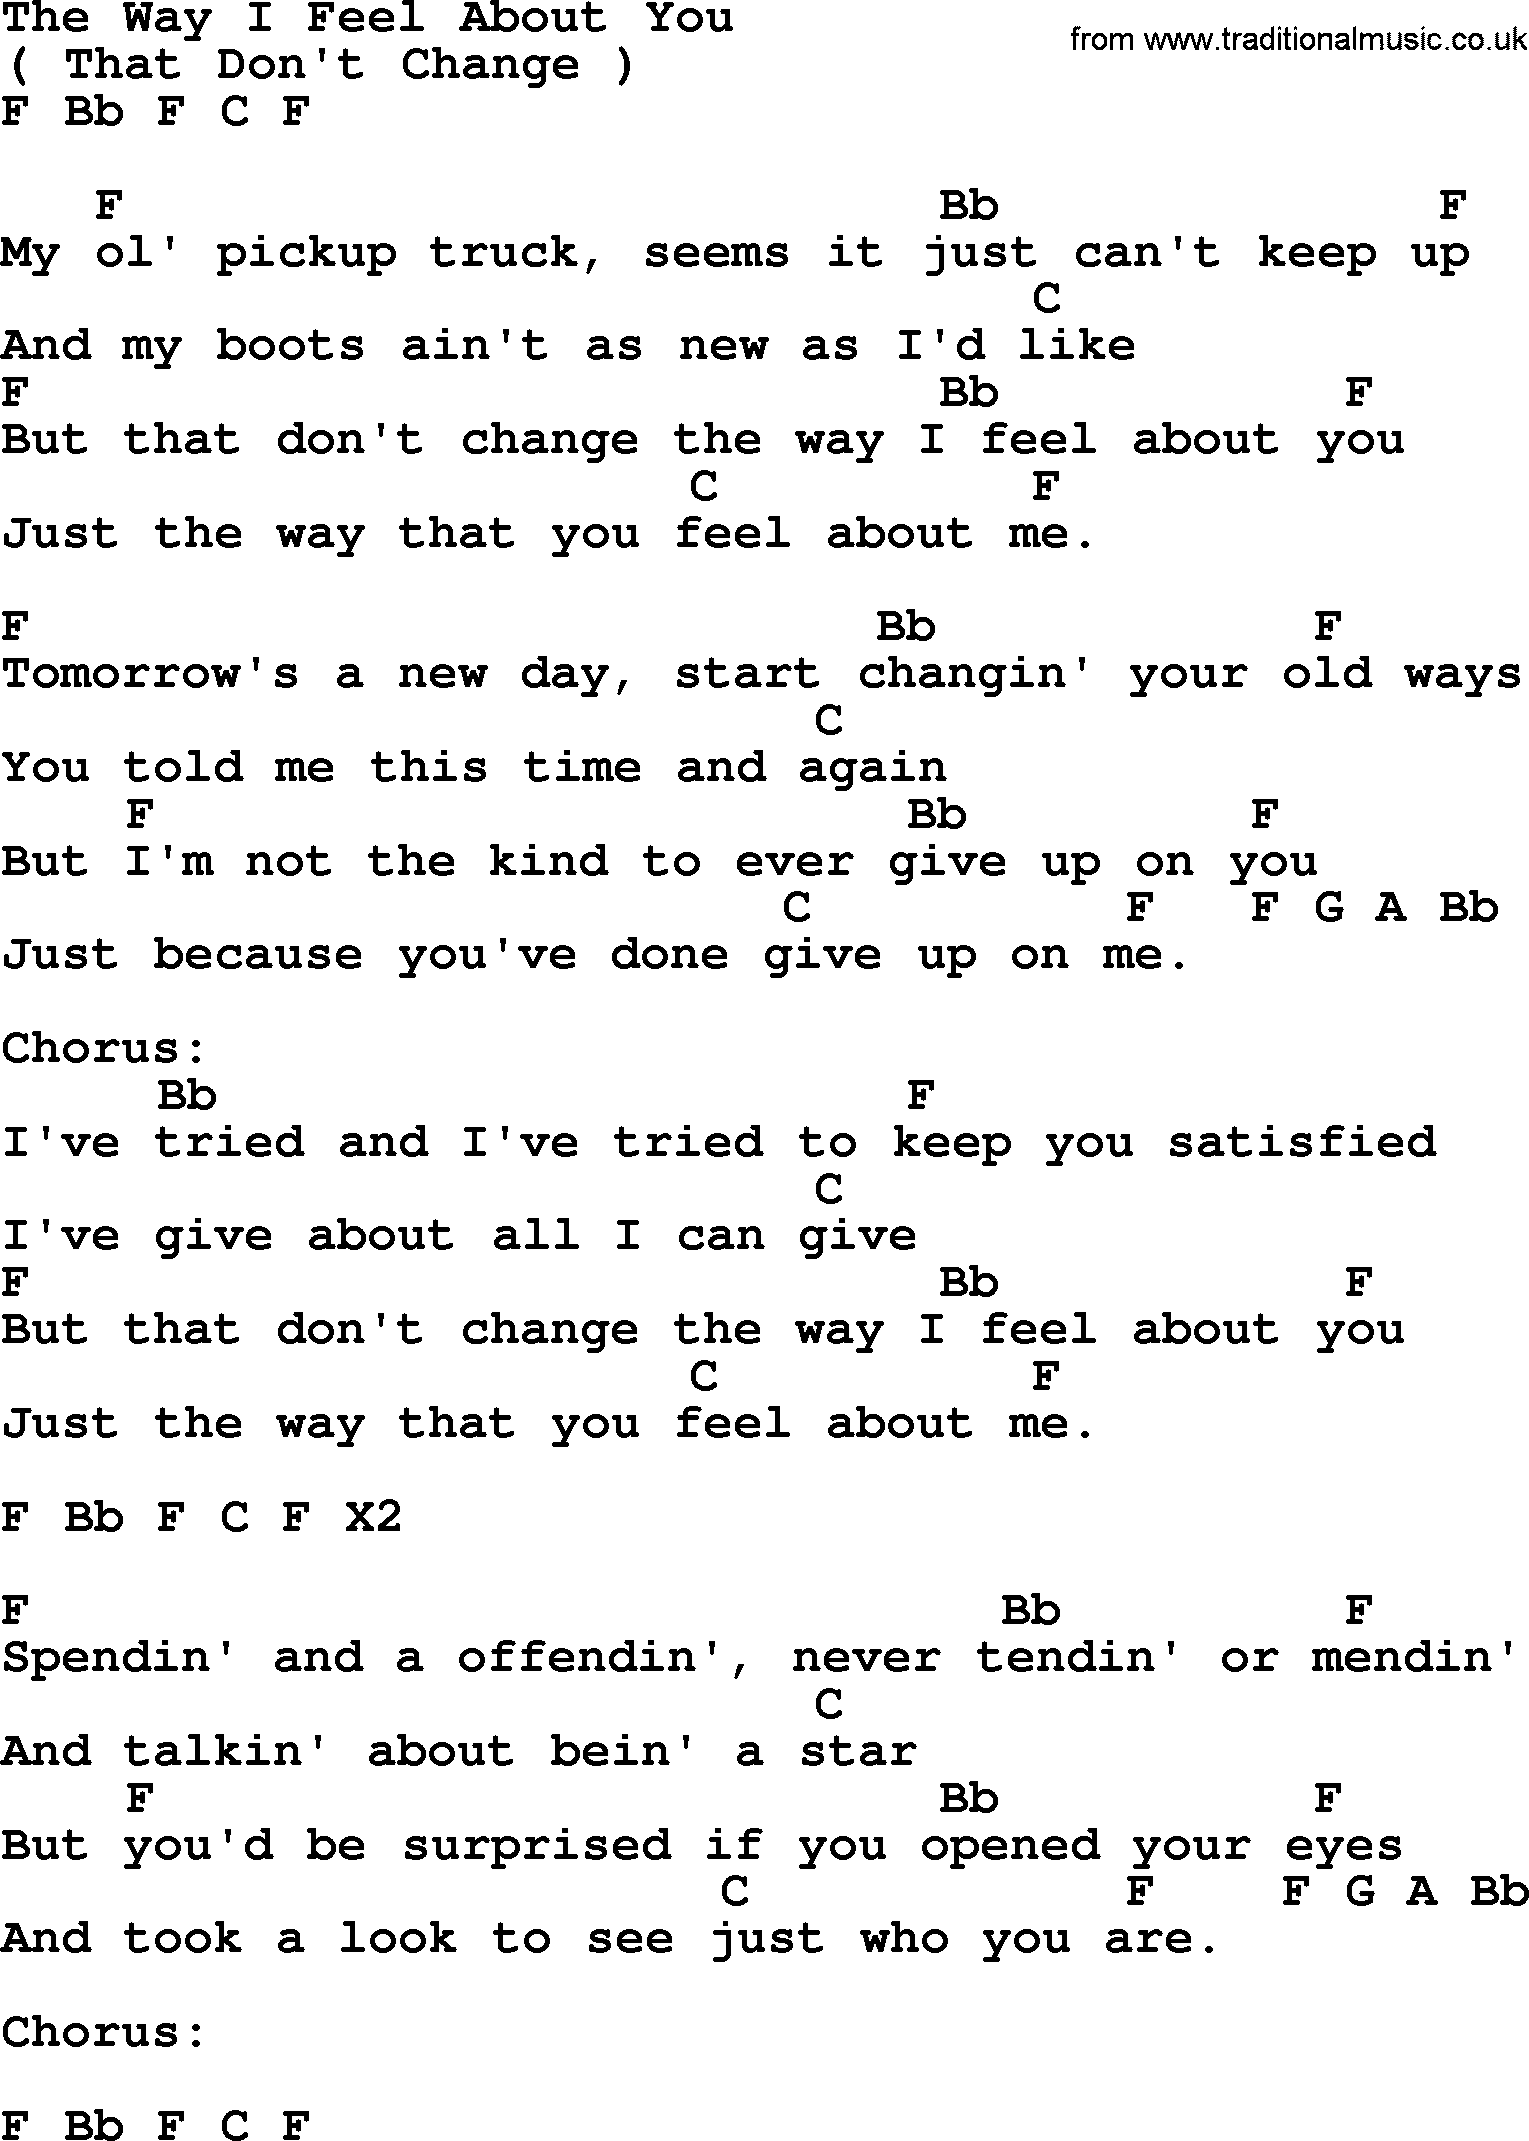 George Strait song: The Way I Feel About You, lyrics and chords